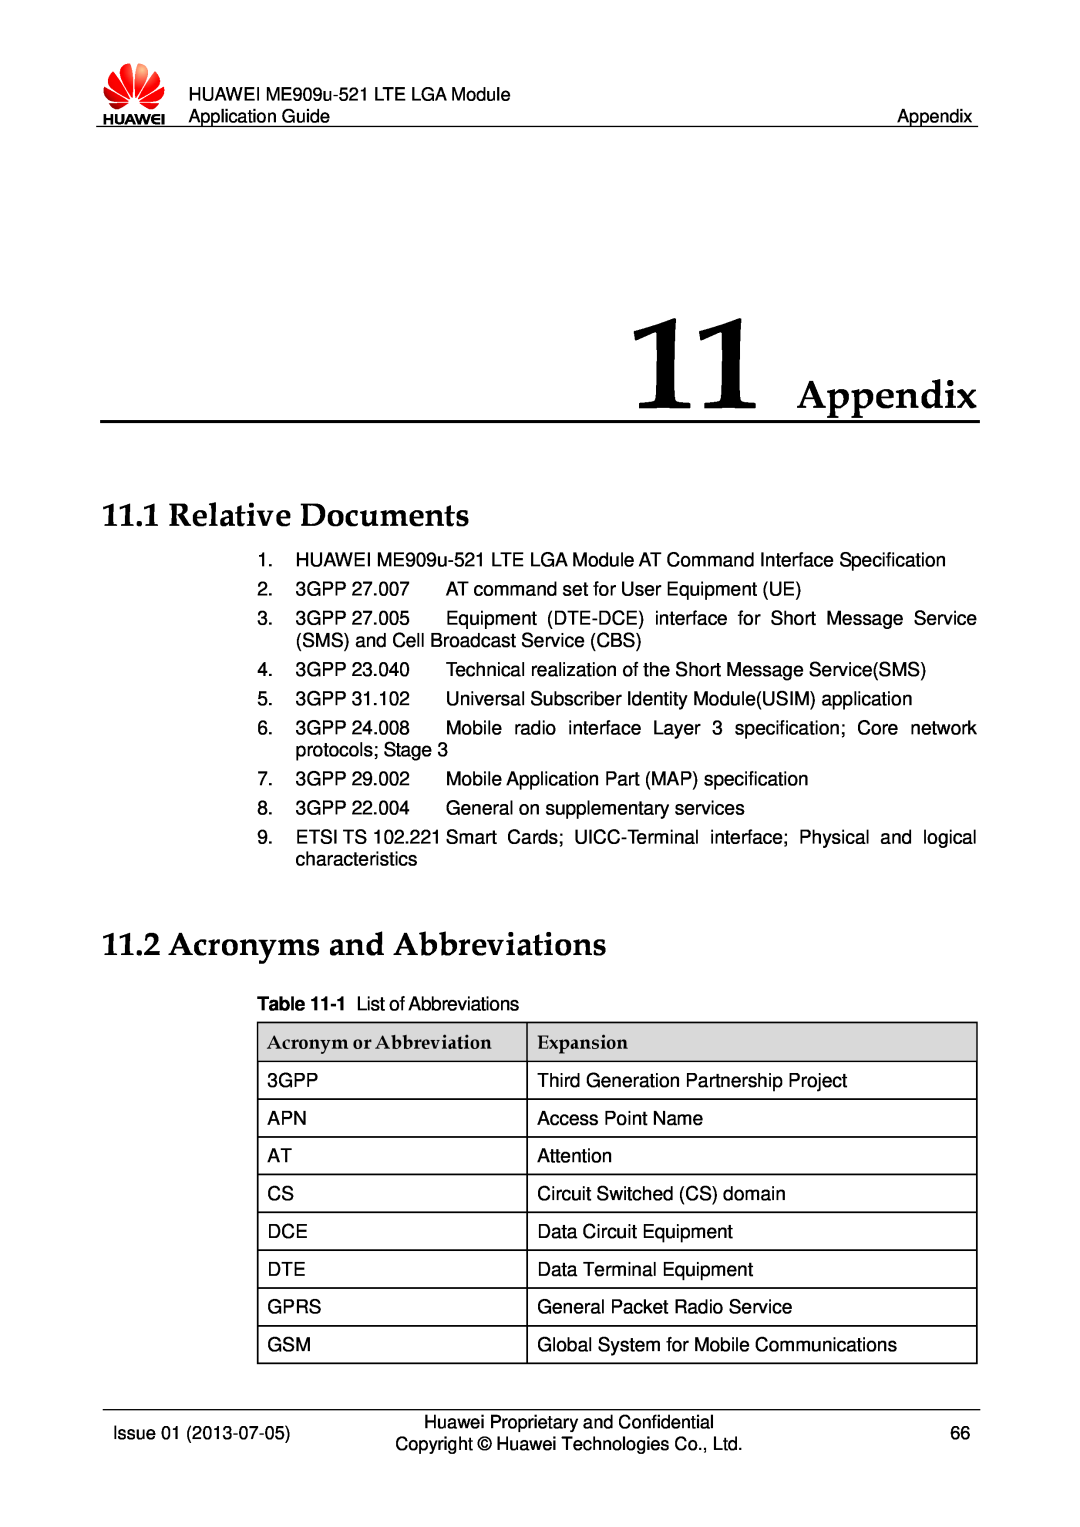 Huawei ME909u-521 manual Appendix, Relative Documents, Acronyms and Abbreviations 